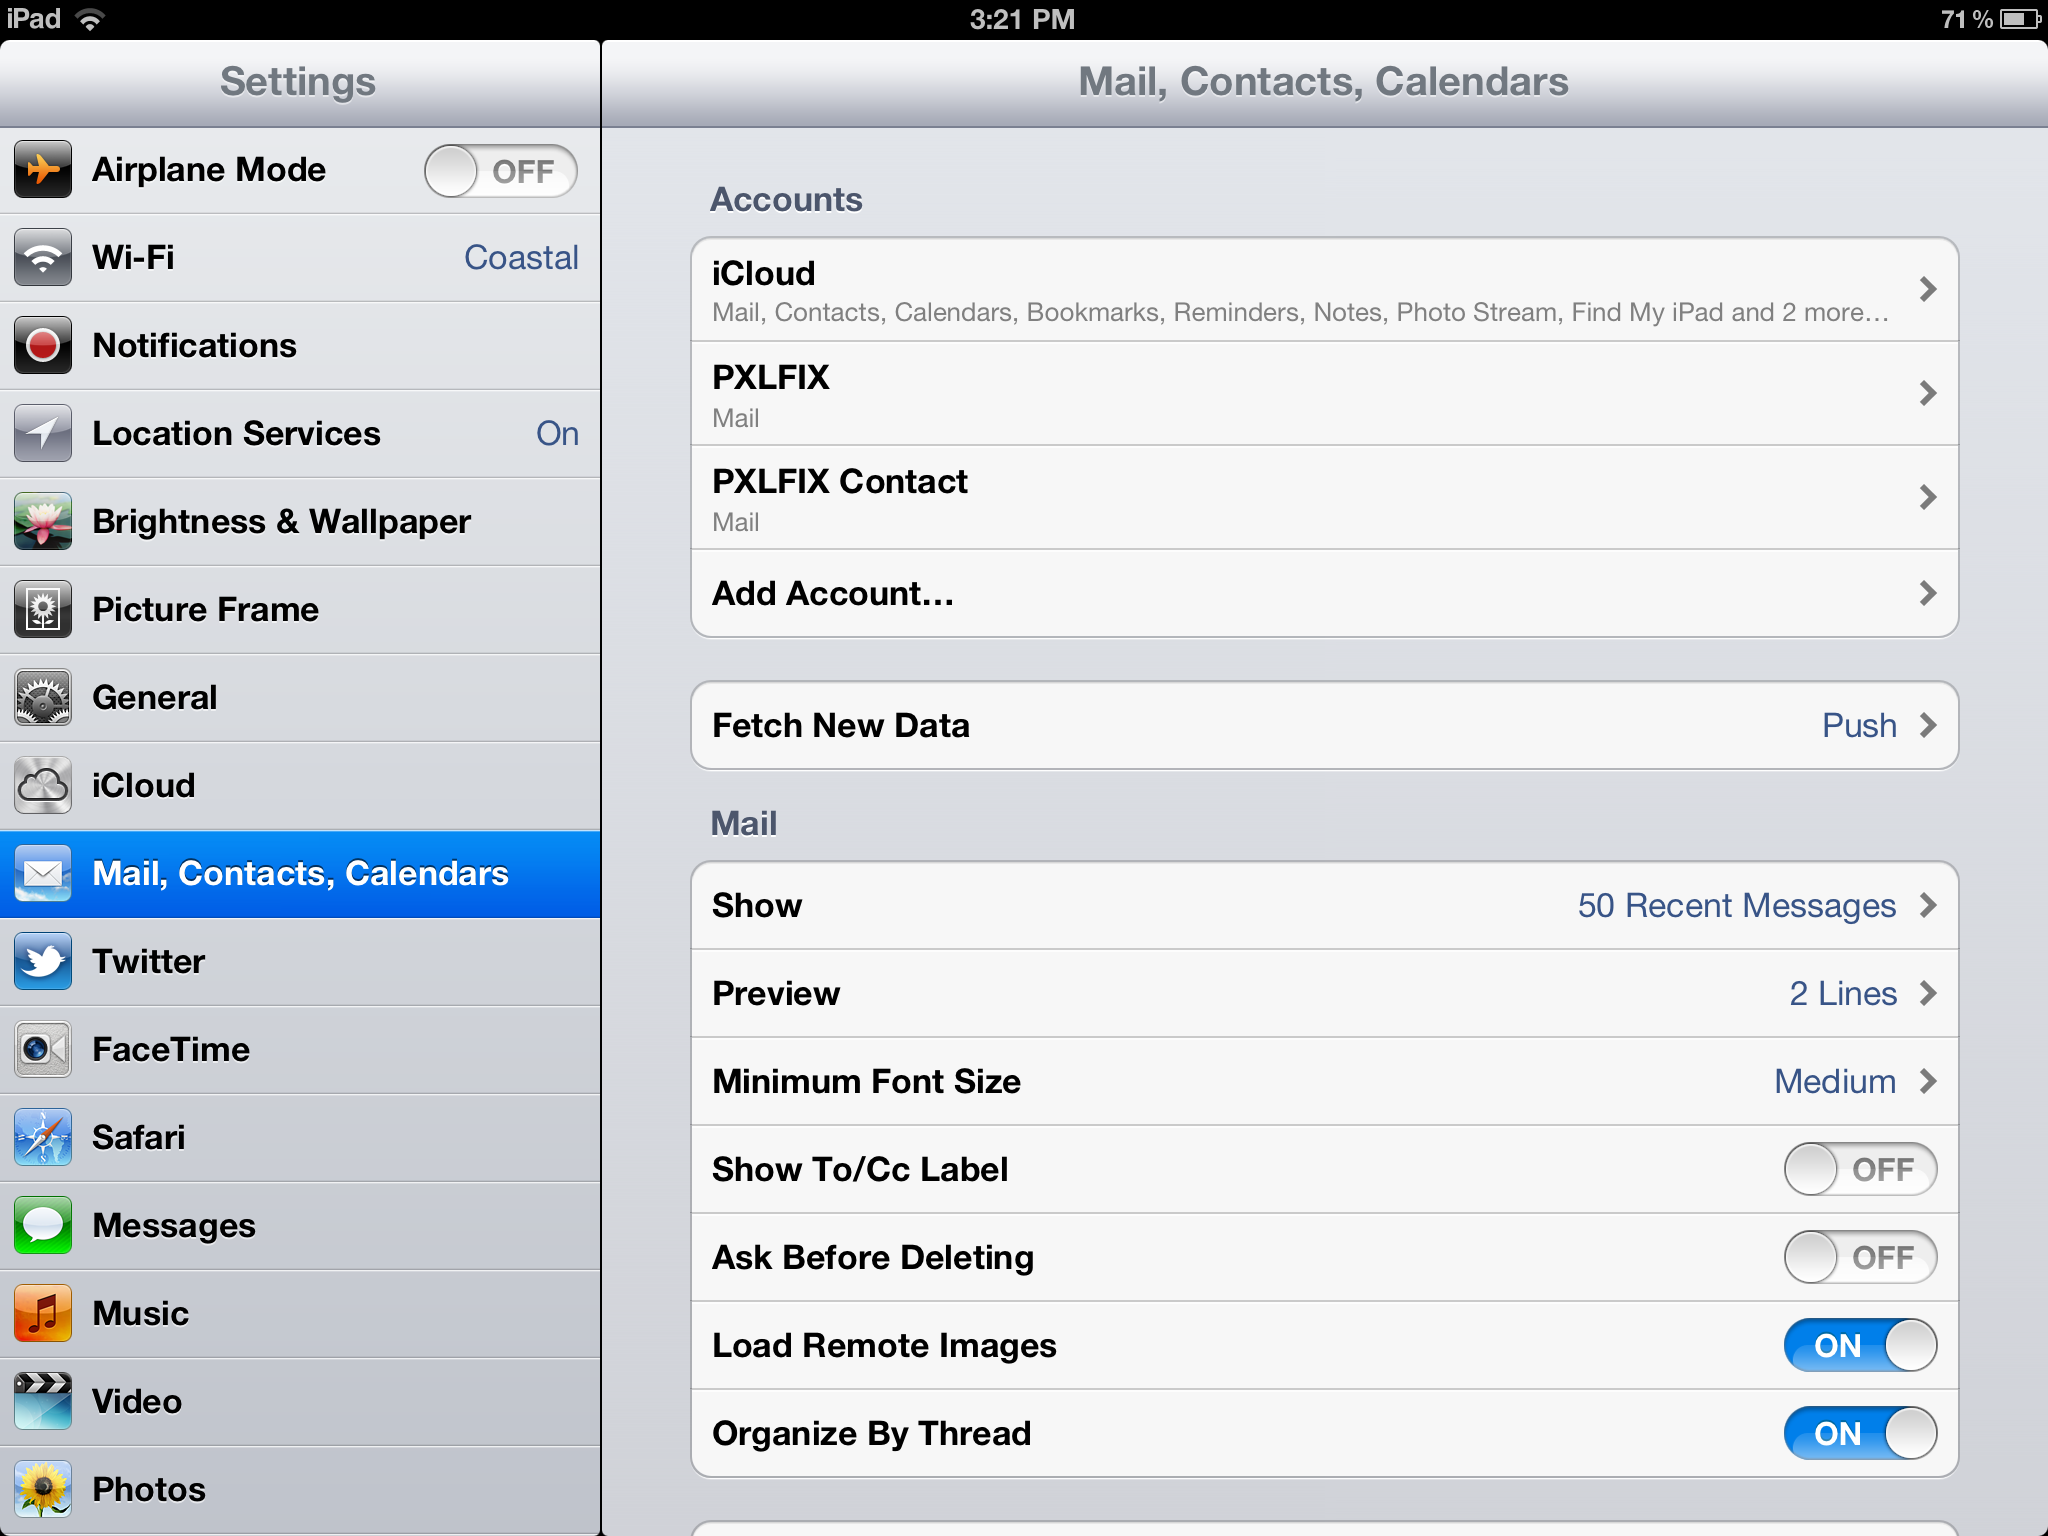 How to add iCloud account to existing e-mail account list on iPhone iPad iPod